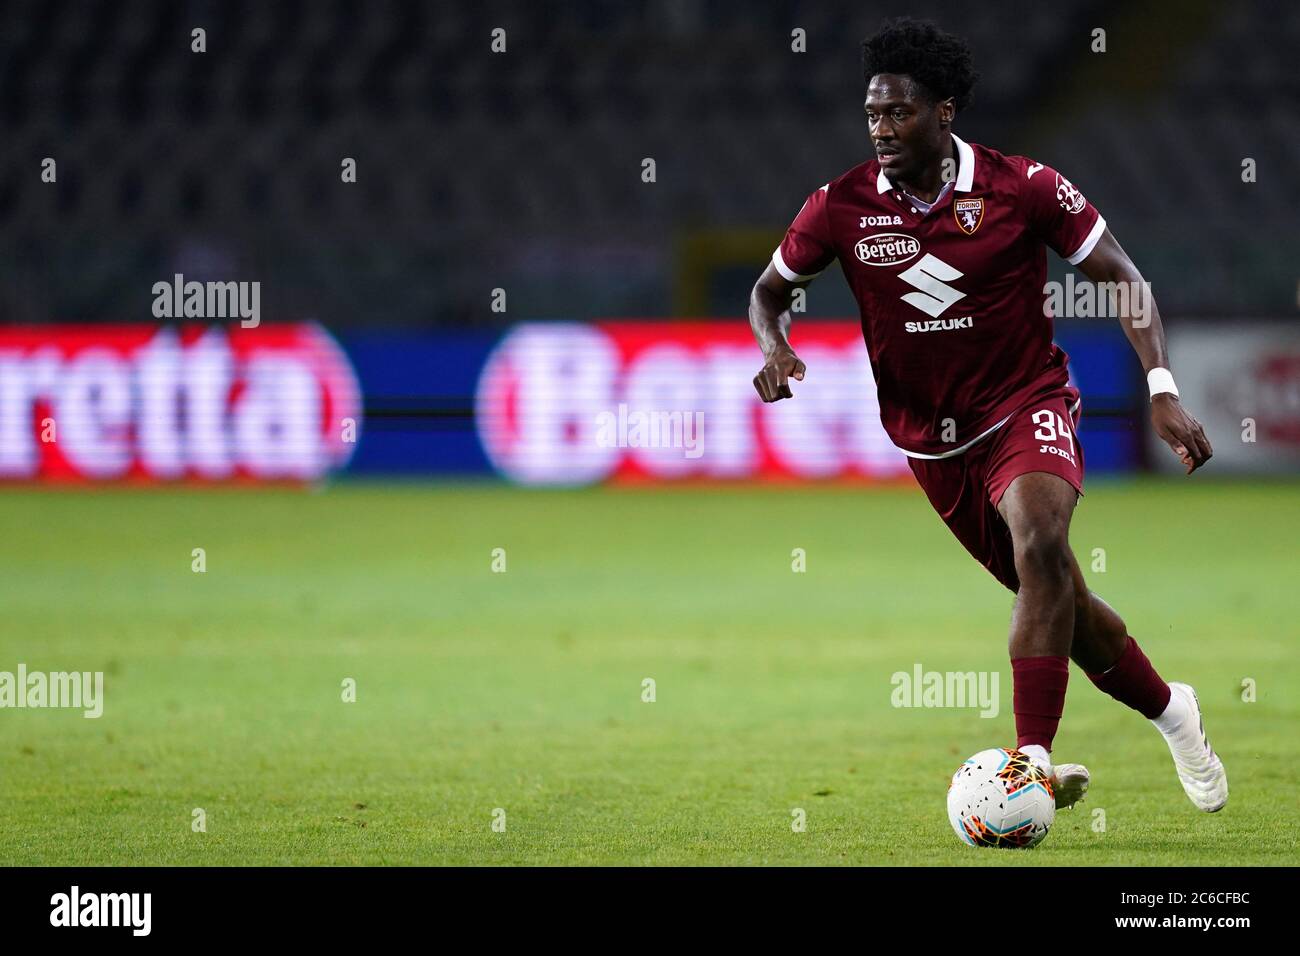 Torino (Italy) 08th June 2020. Italian Seria A. Temitayo Aina  of Torino FC in action   during the the Serie A match  between Torino Fc and Brescia Calcio.  Torino Fc wins 3-1 over Brescia Calcio. Credit: Marco Canoniero/Alamy Live News Stock Photo